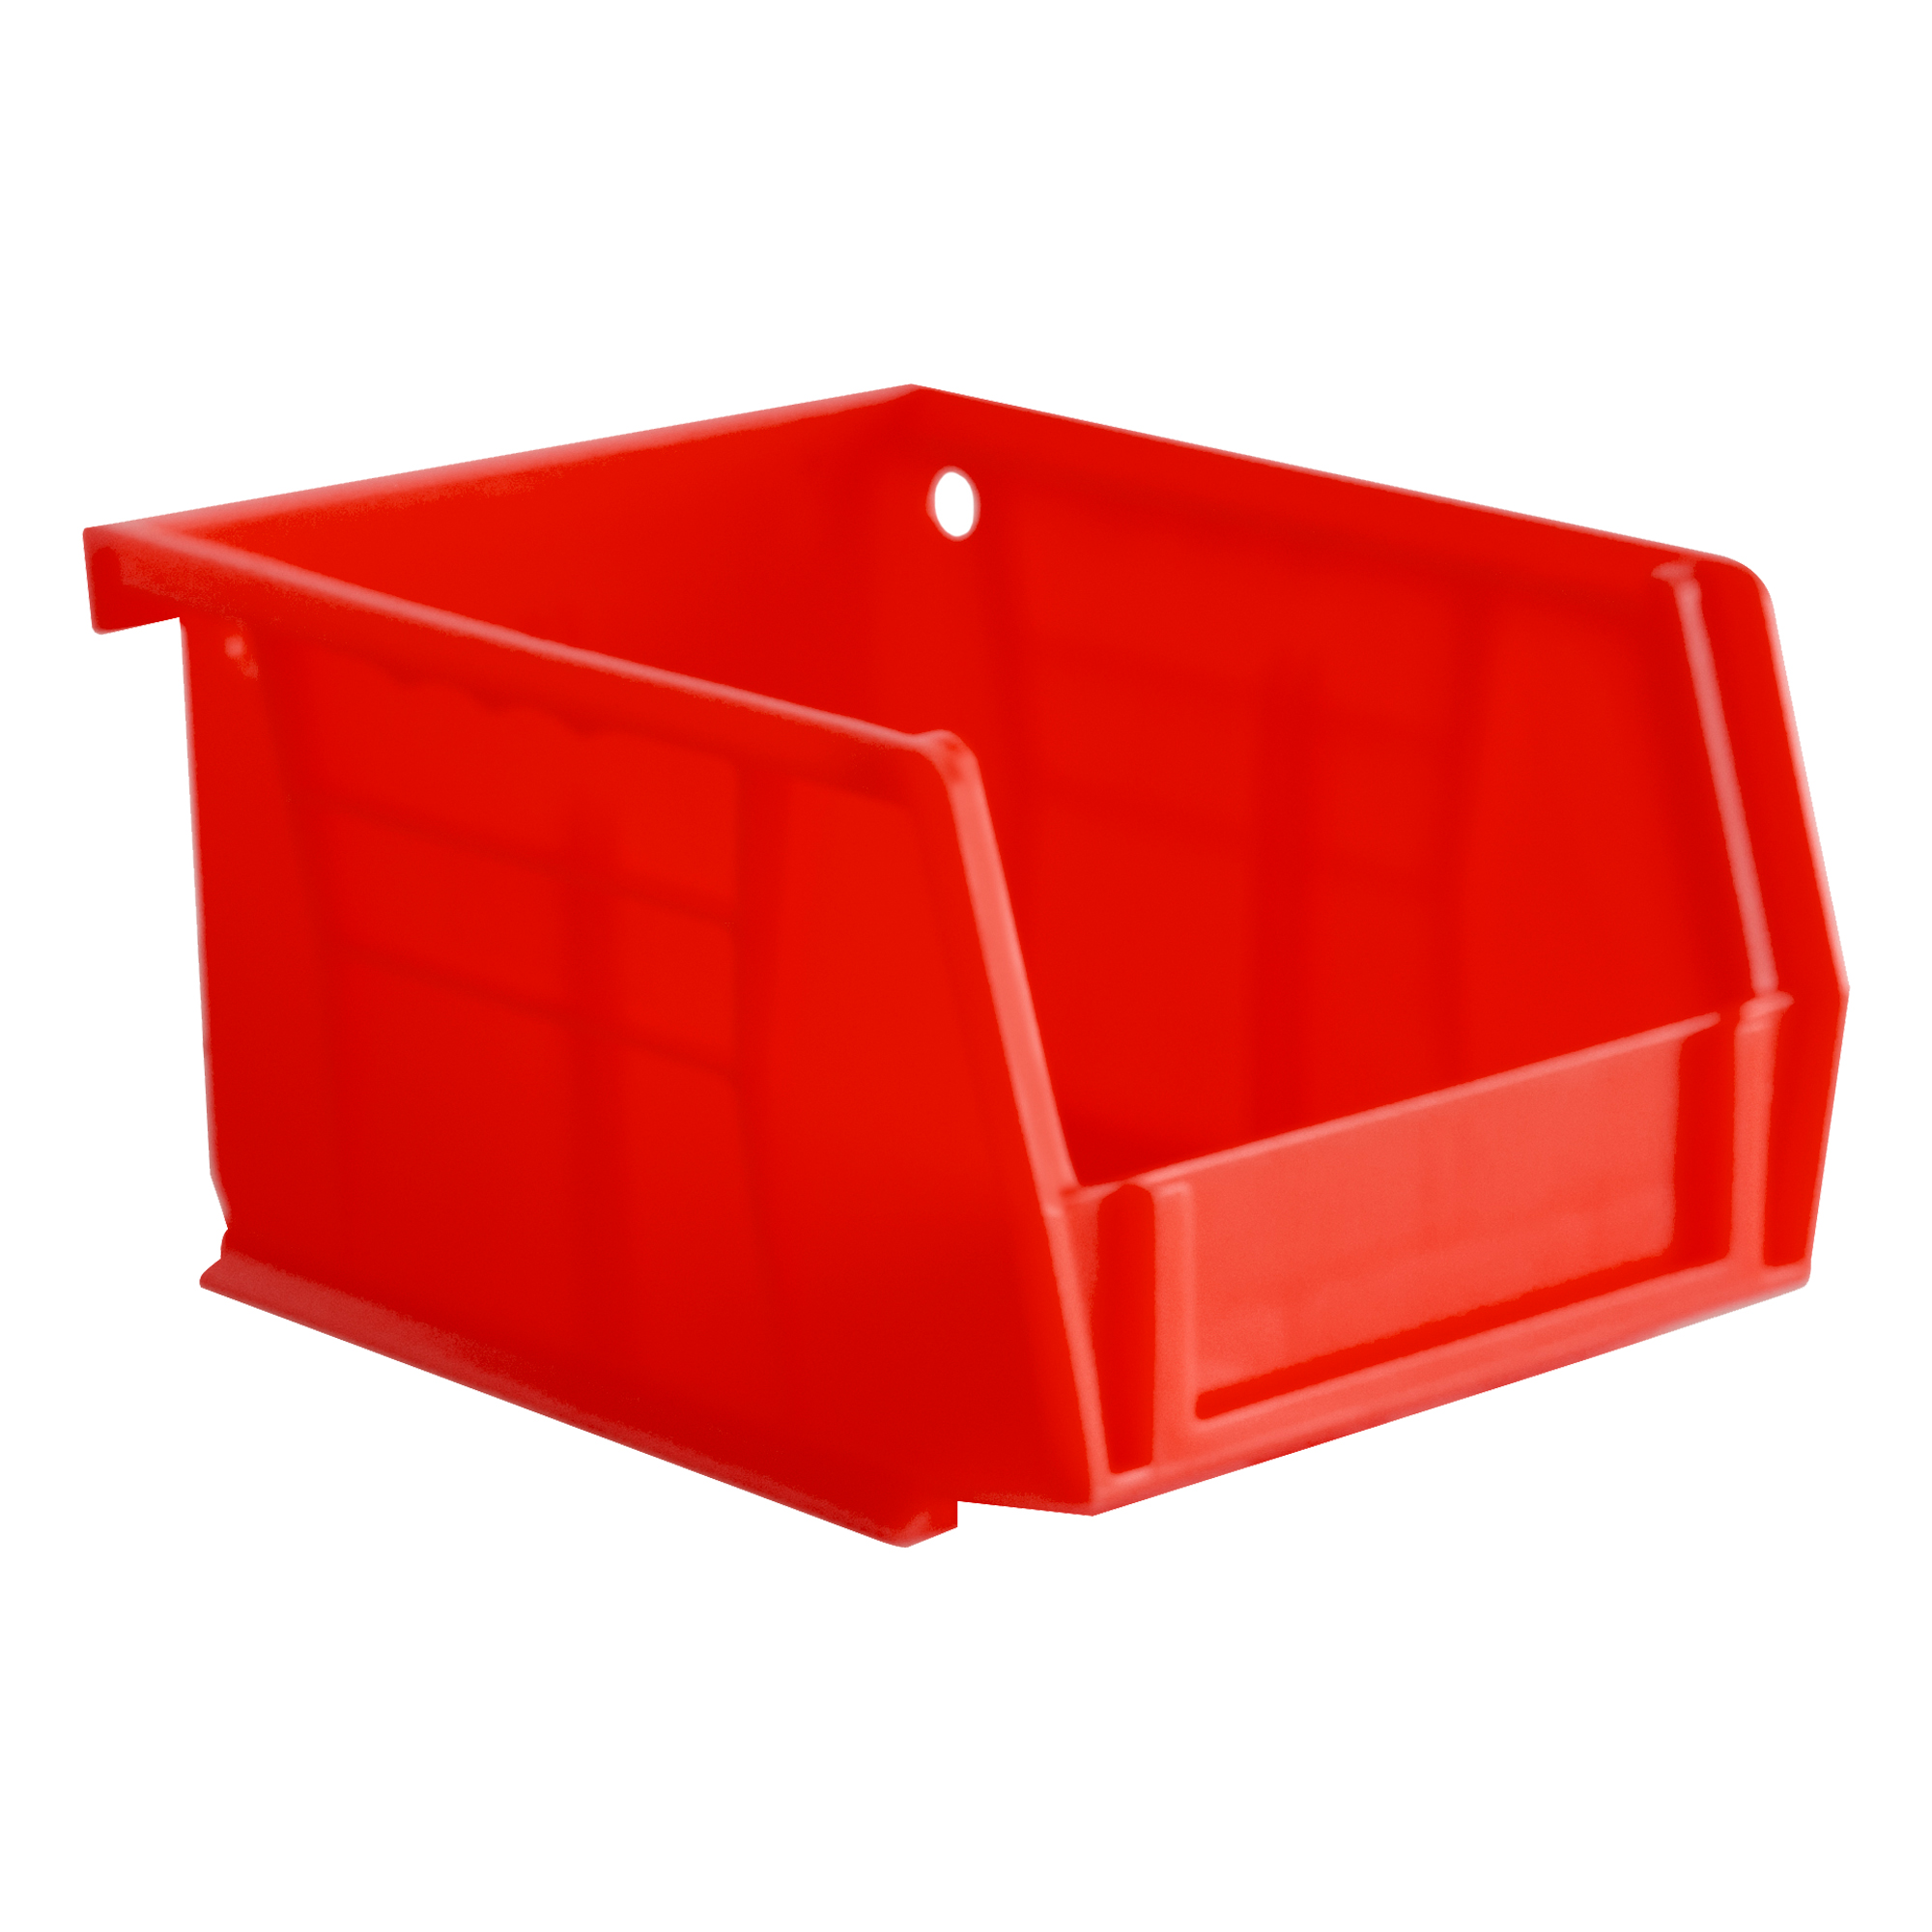 4 Width x 3 Height x 5 Depth Durham PB30210-17 Copolymer Plastic Hook On Bin Red Sold in Pack of 24